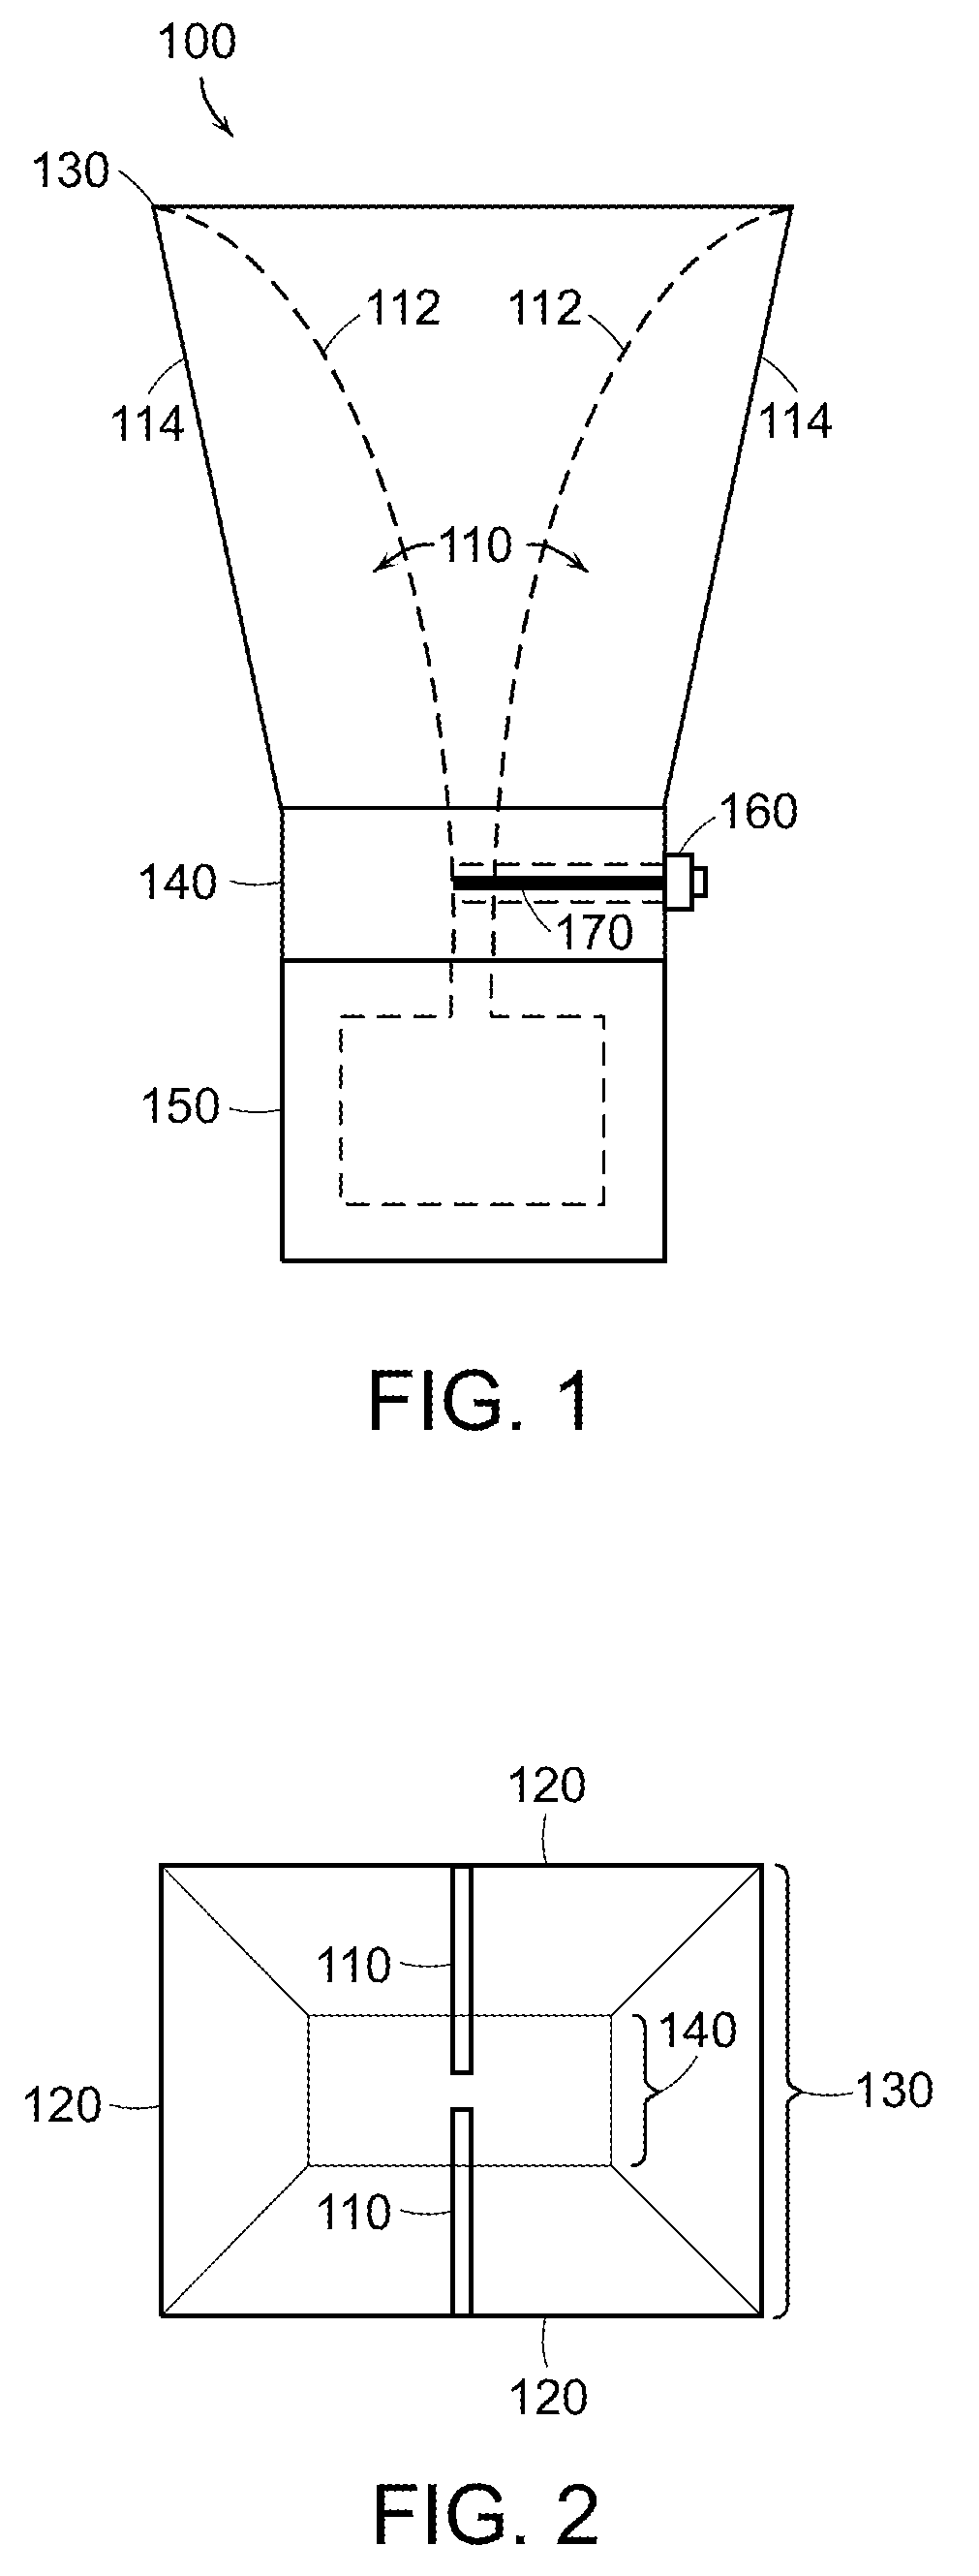 Horn Antenna with Integrated Impedance Matching Network for Improved Operating Frequency Range